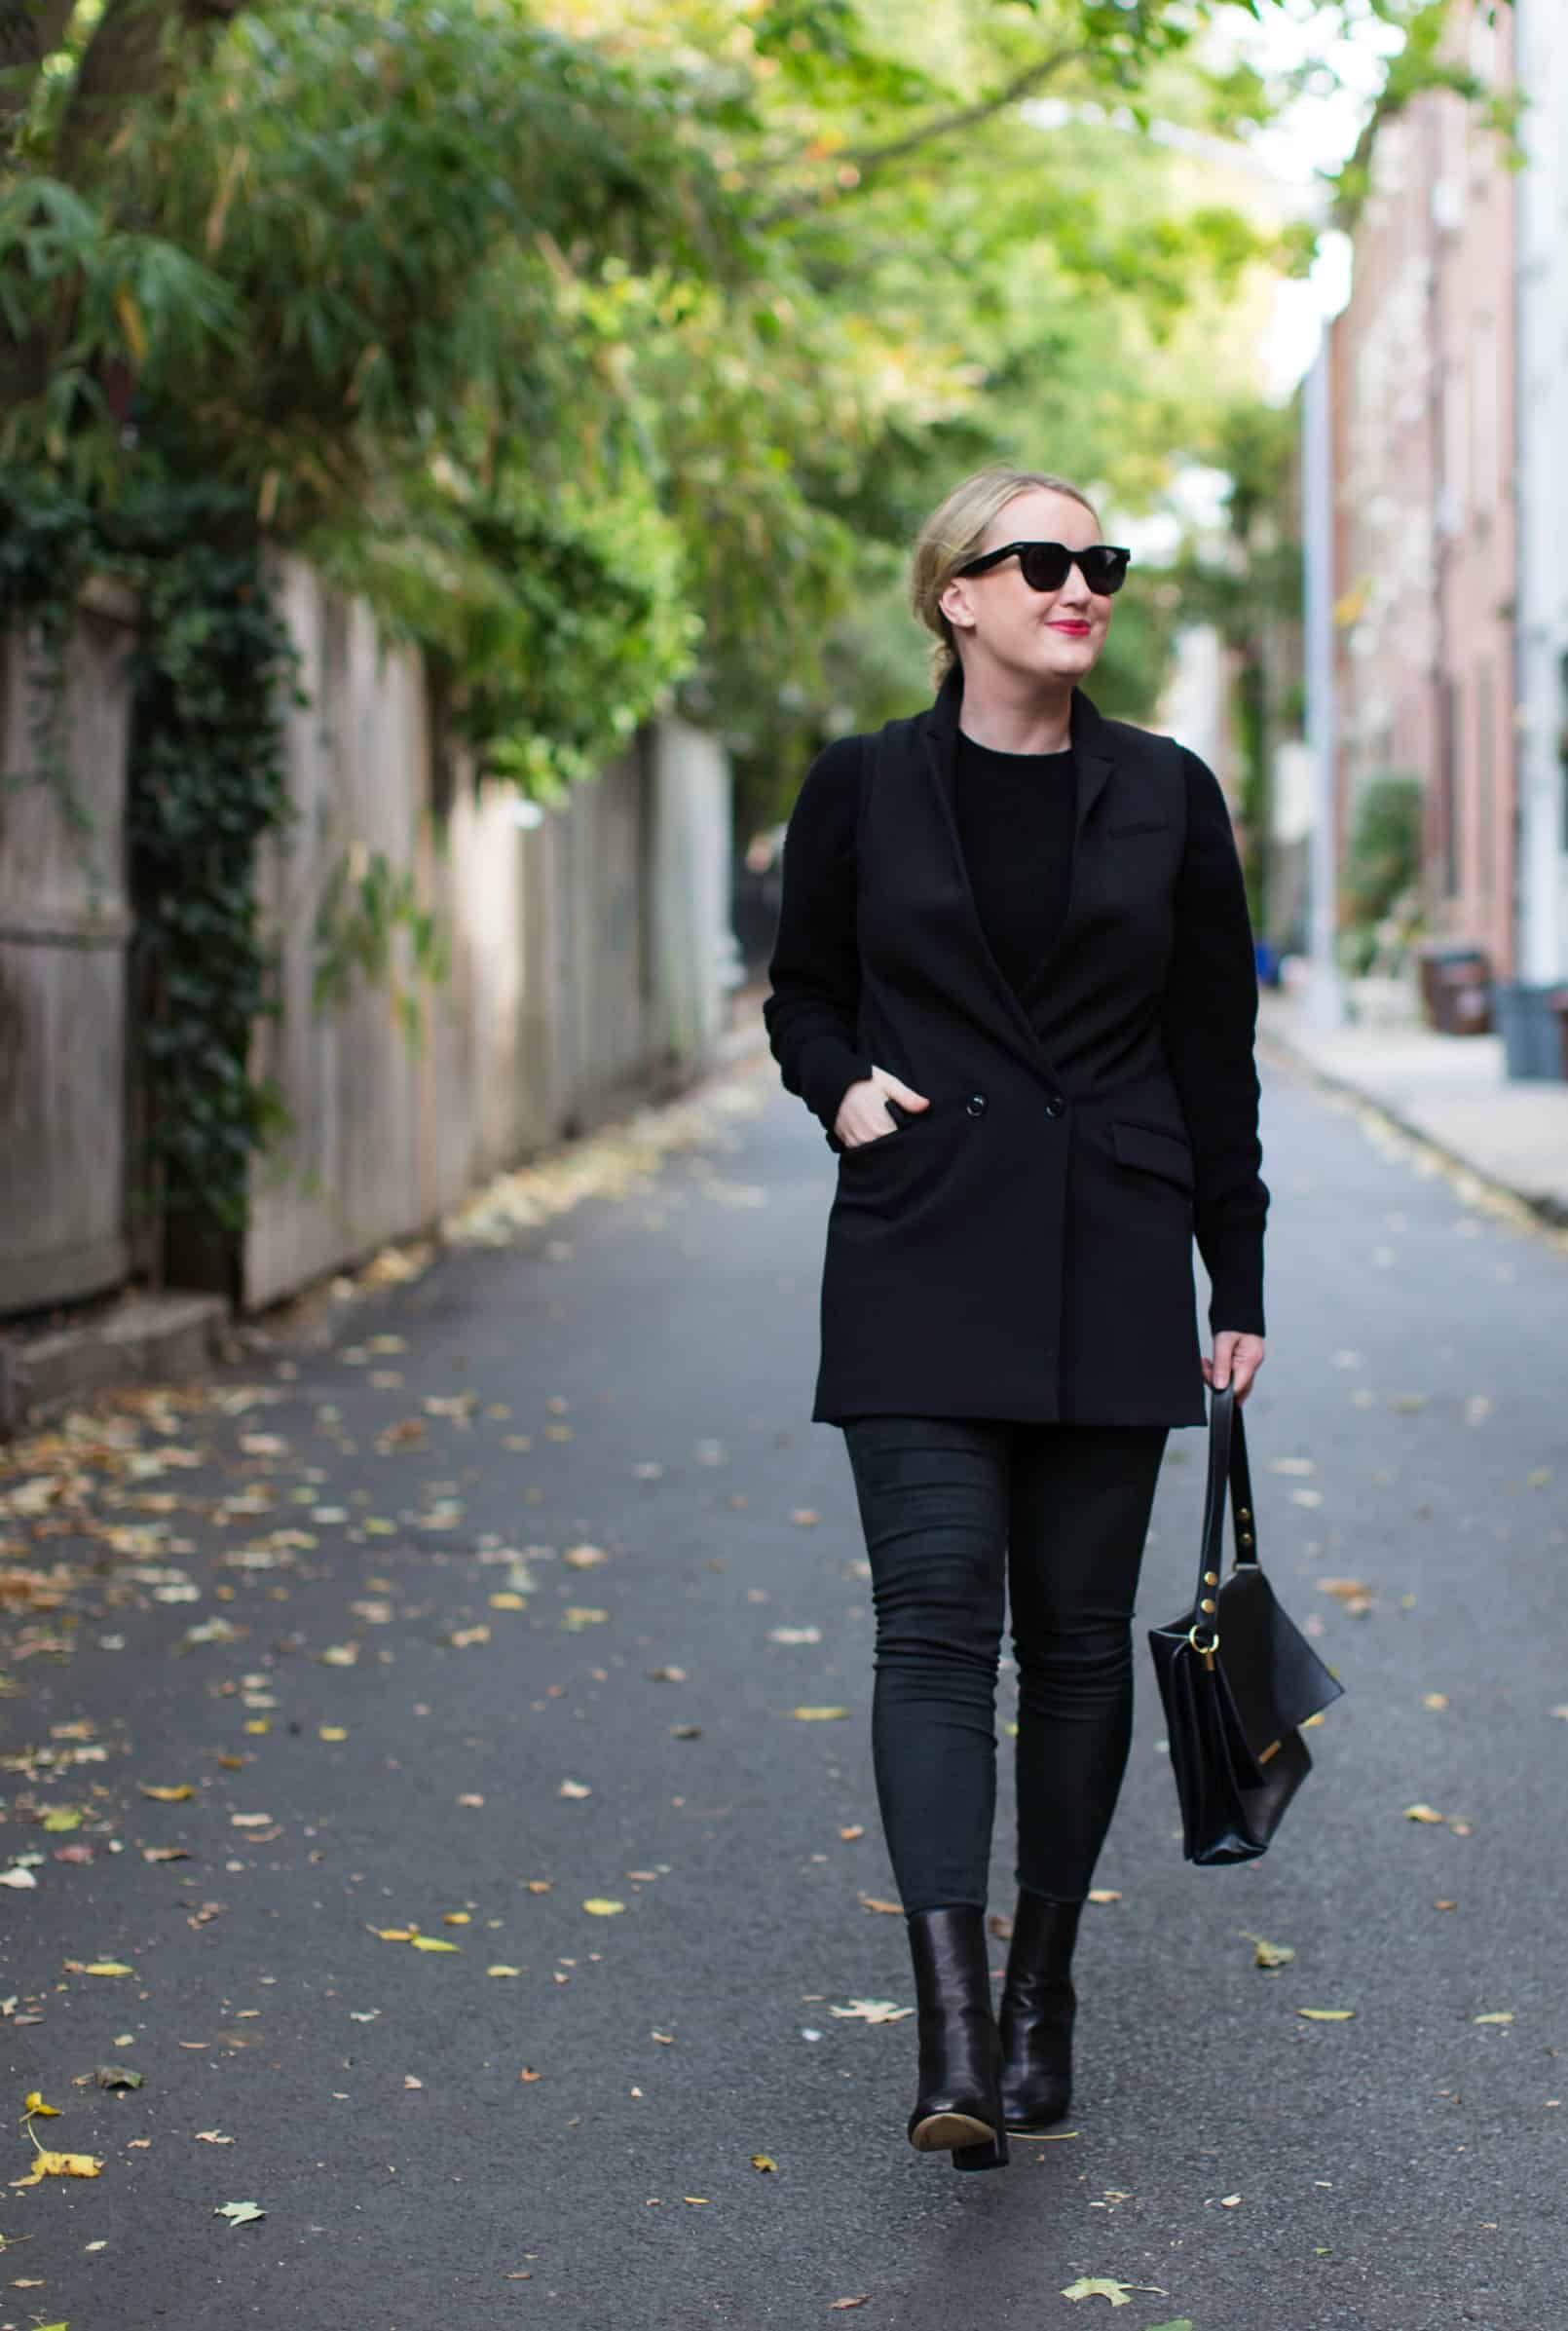 Meghan Donovan of wit & whimsy wears an all black look